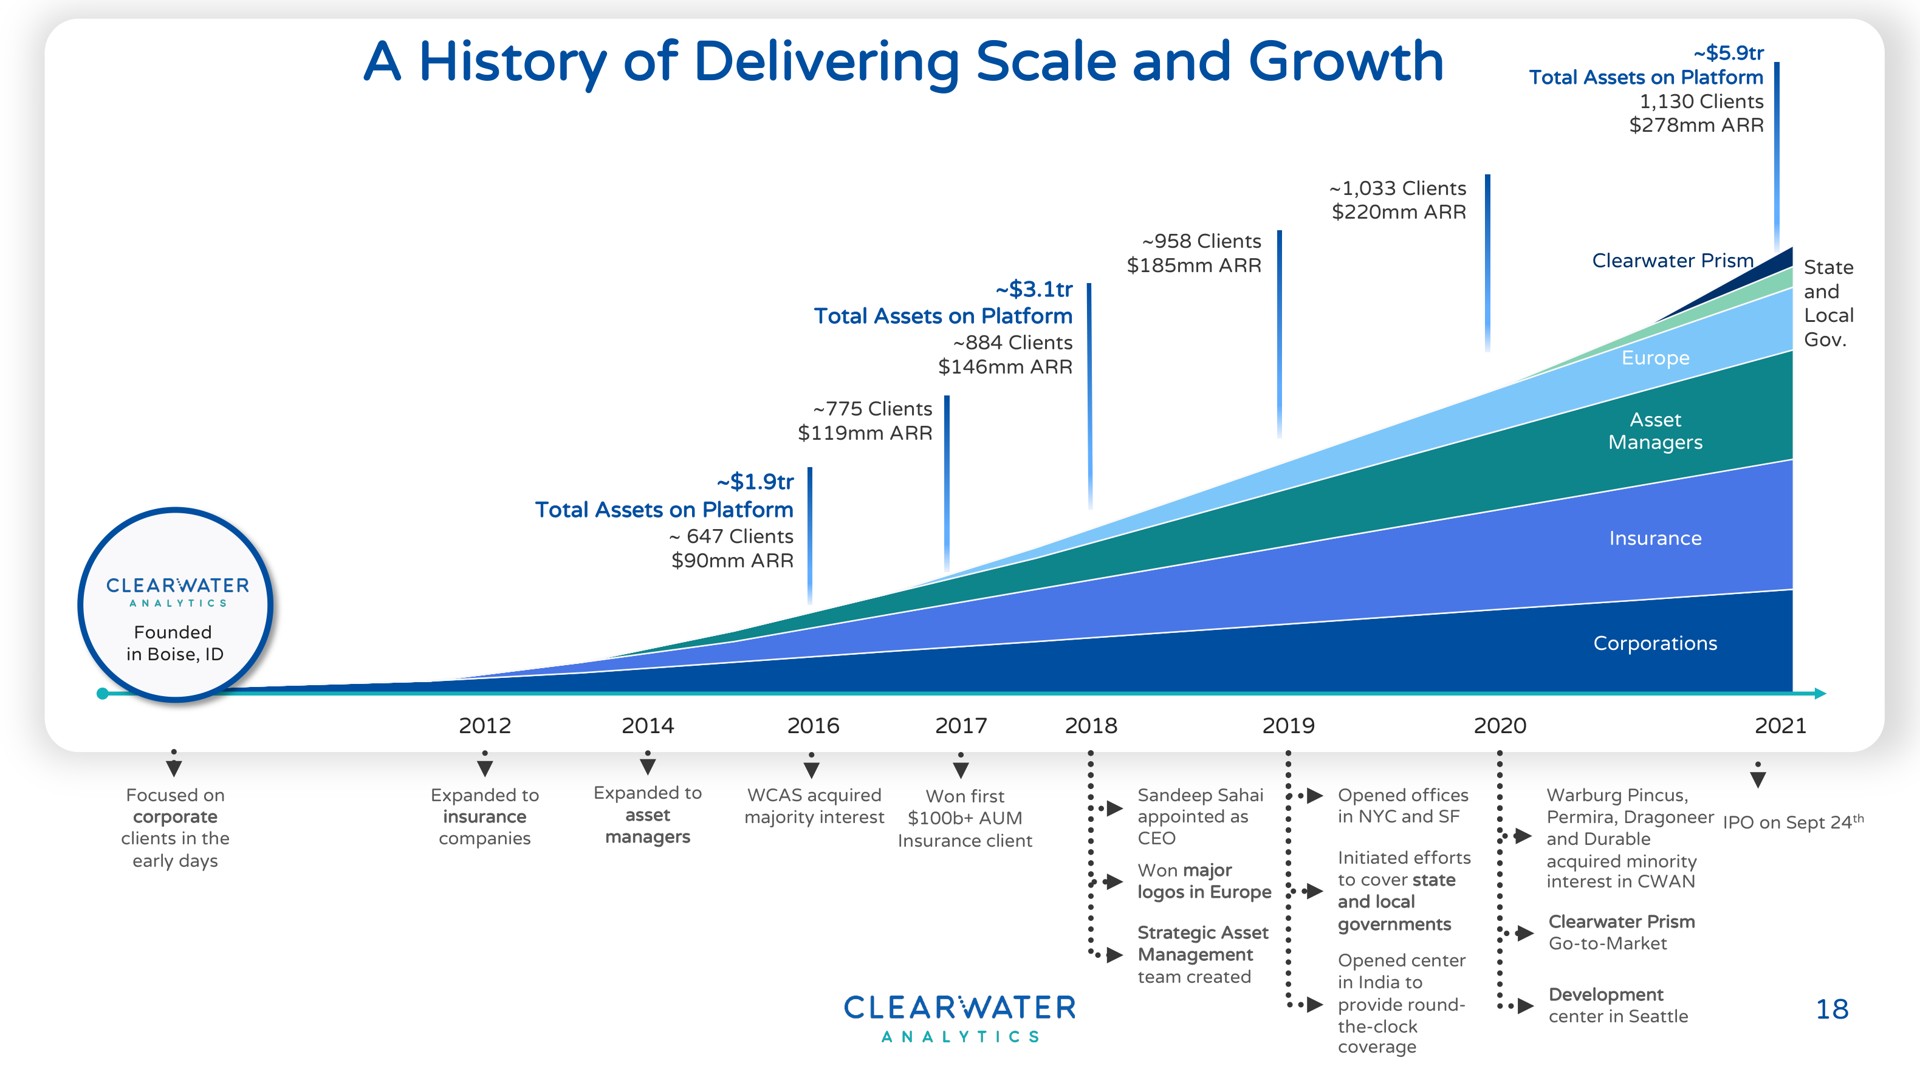 a history of delivering scale and growth | Clearwater Analytics